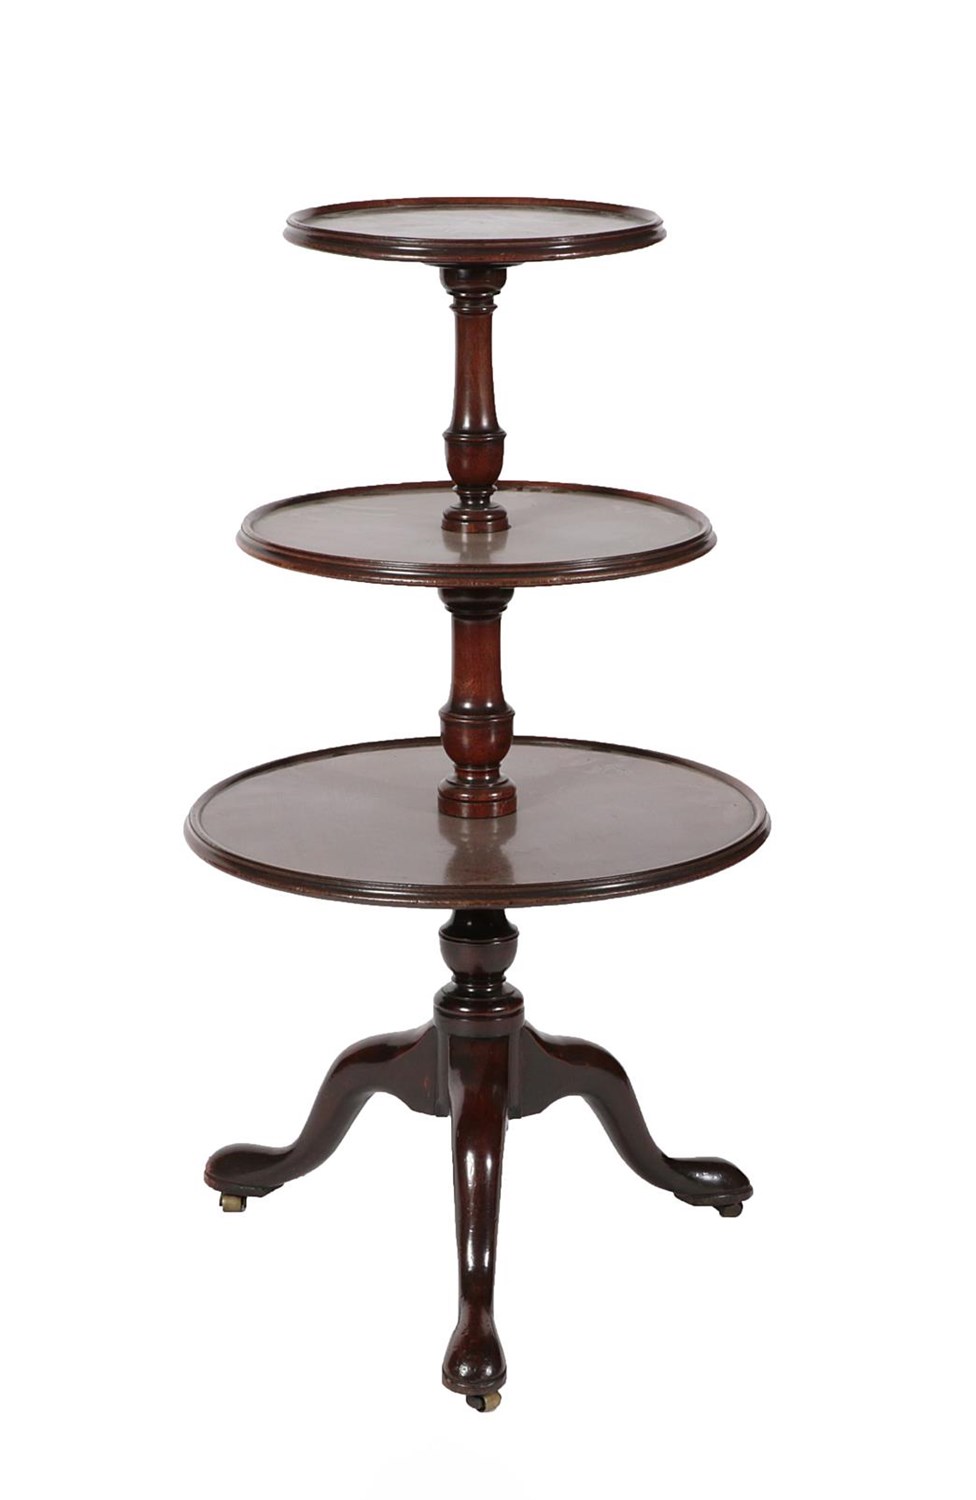 Lot 546 - A George III Mahogany Circular Dumb Waiter, late 18th century, of circular moulded form with turned